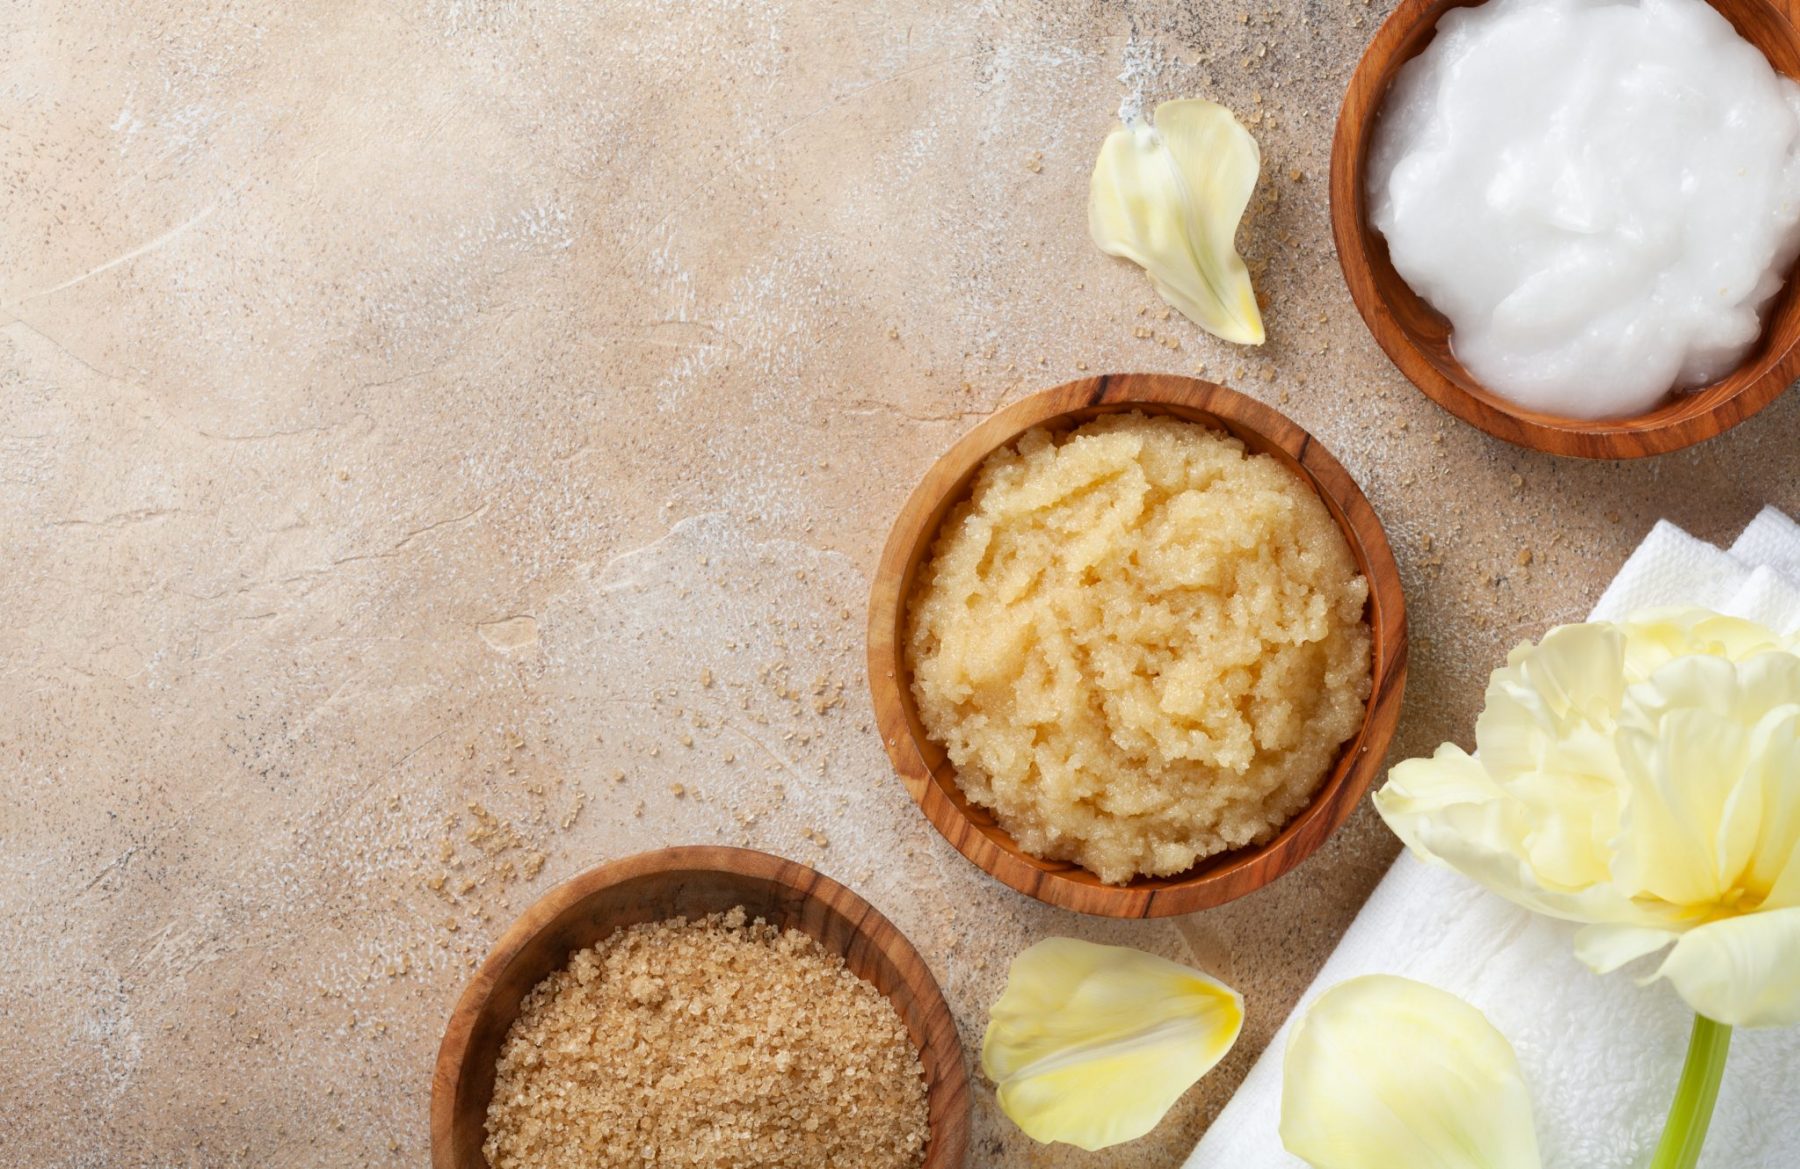 There are different types of ingredient for making body scrub